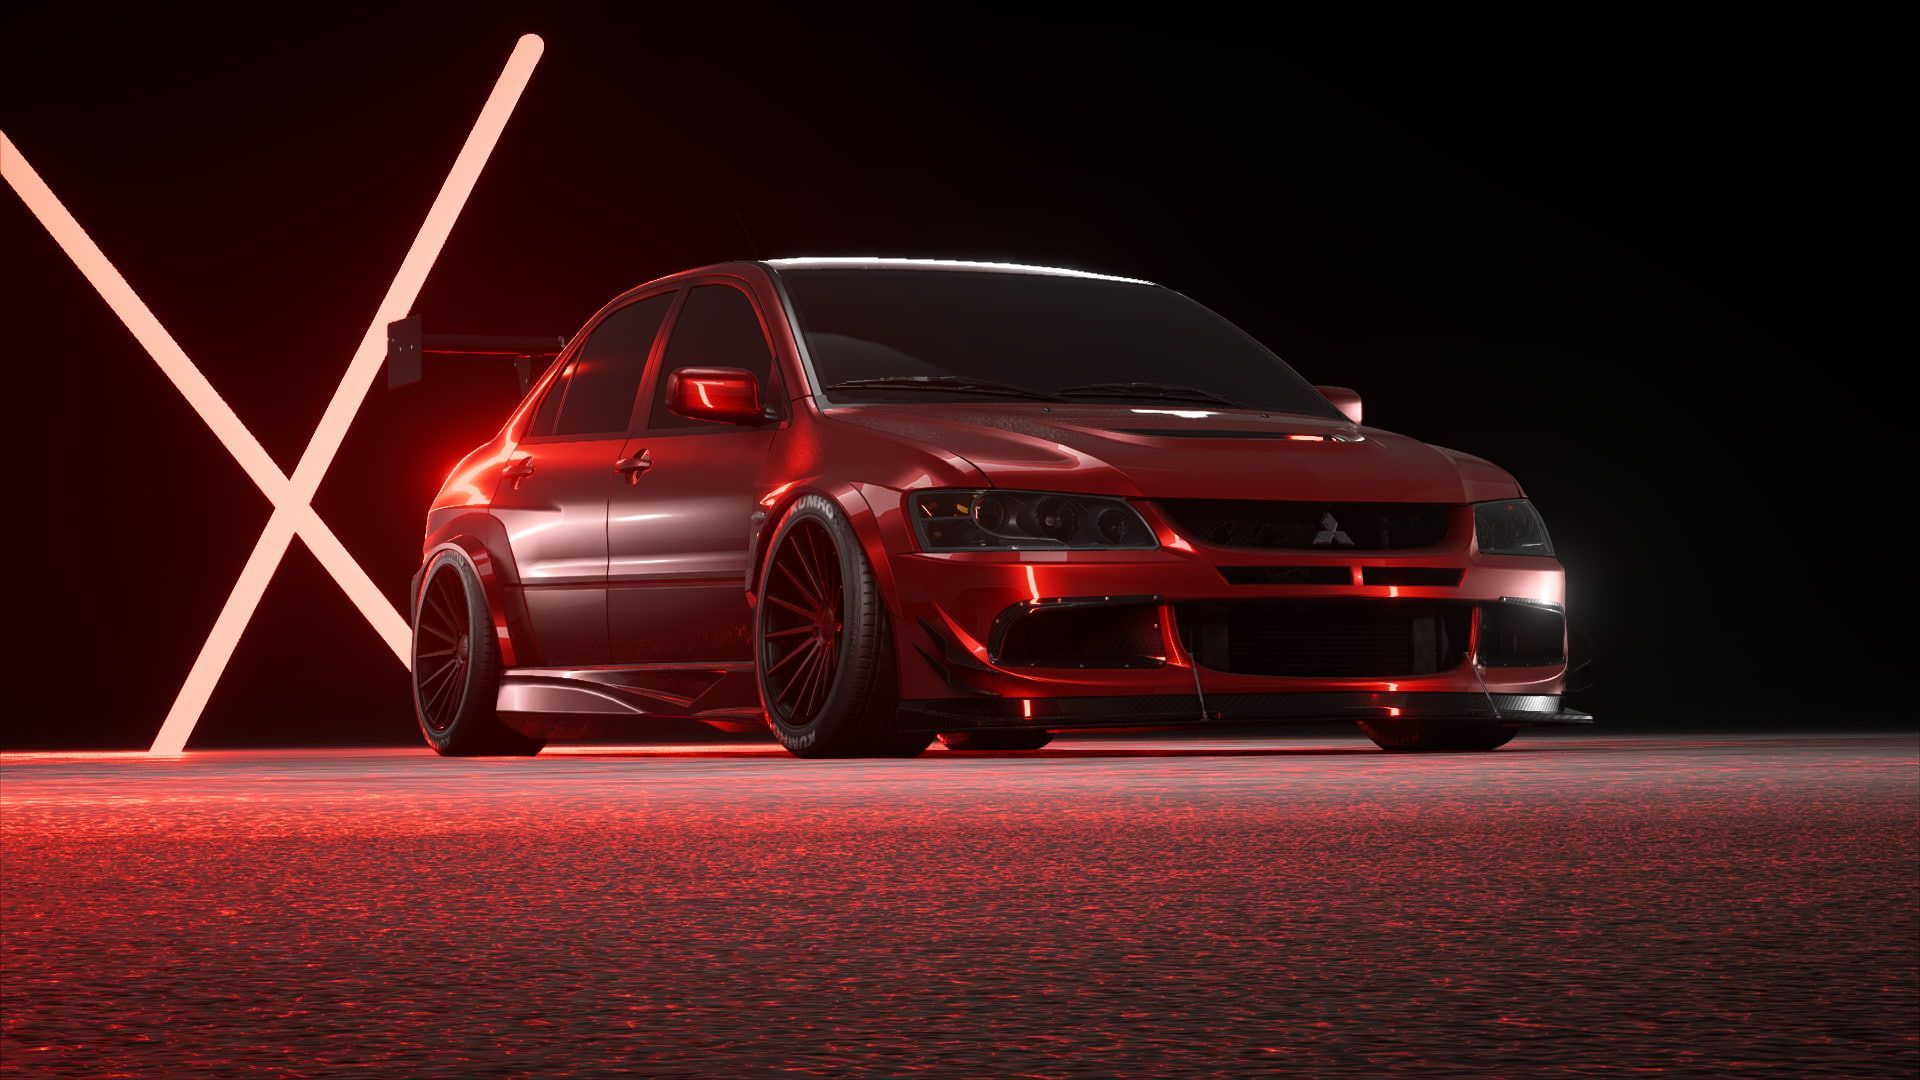 evo Mitsubishi Lancer Evo X #red Need for Speed #car need for speed payback red cars #vehicle P #wallpaper #hdwallpape. Mitsubishi lancer, Evo x, Mitsubishi